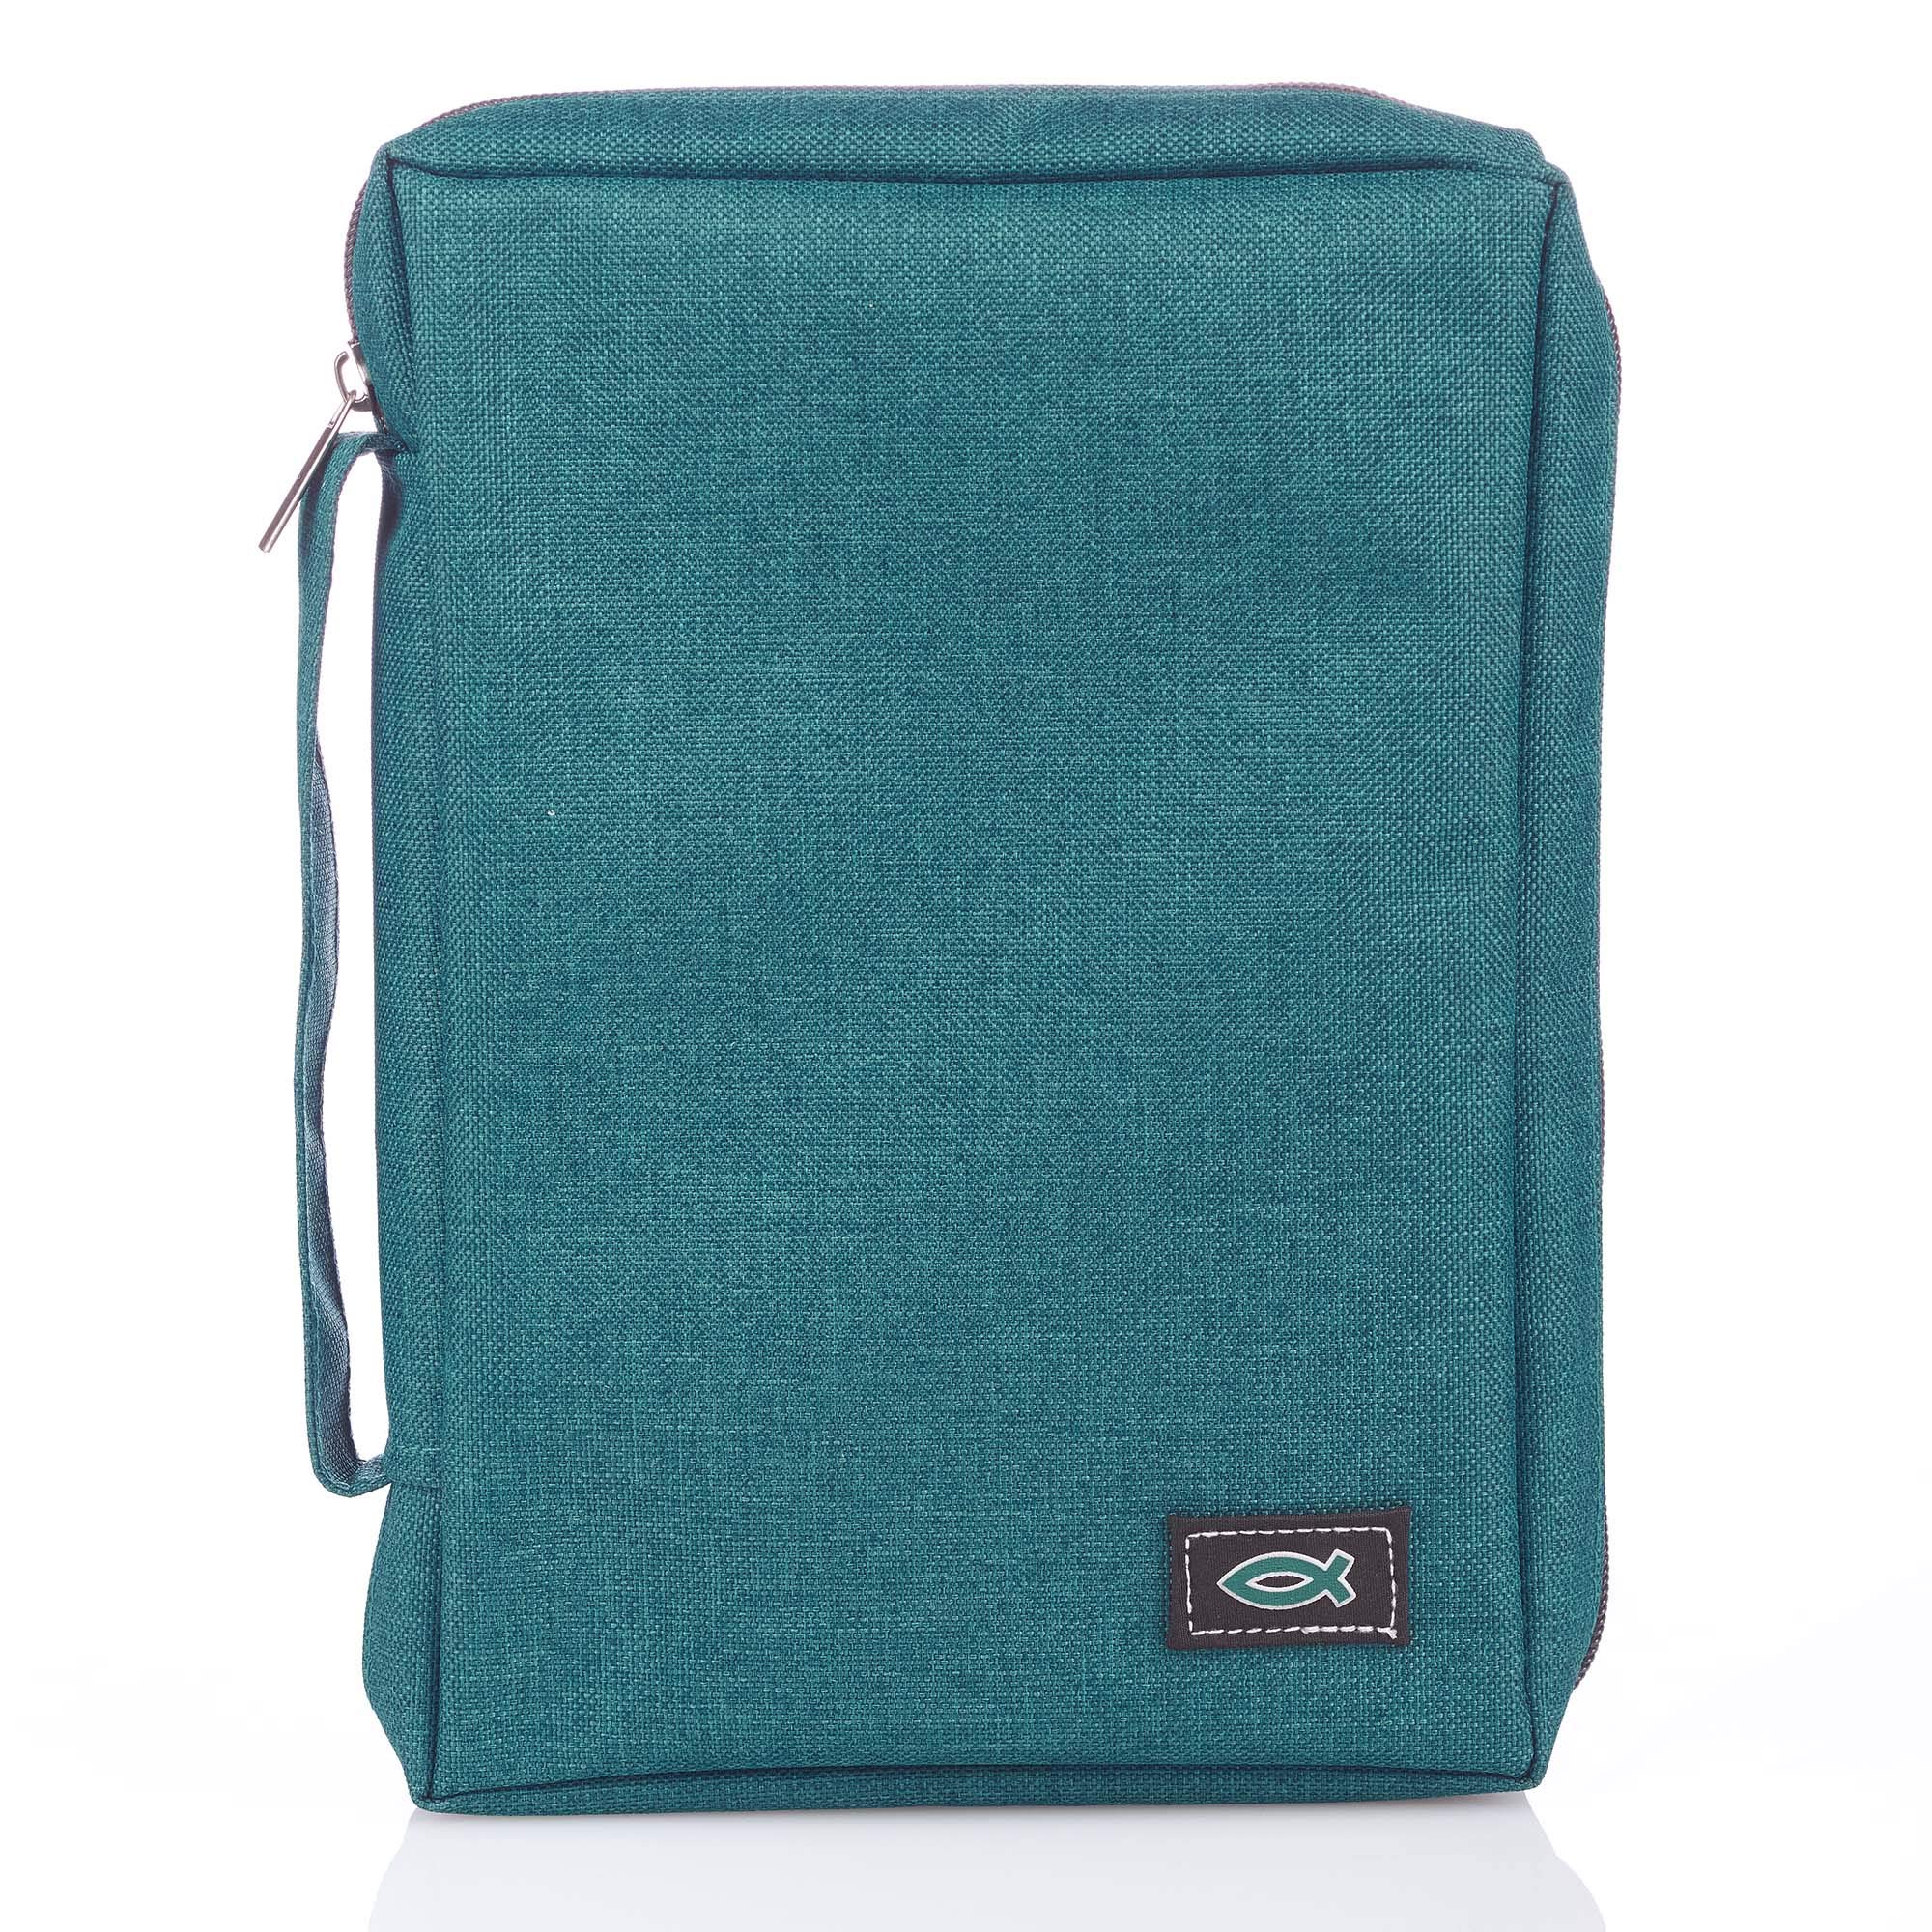 Teal Poly-Canvas Bible Cover with Fish Emblem, Small